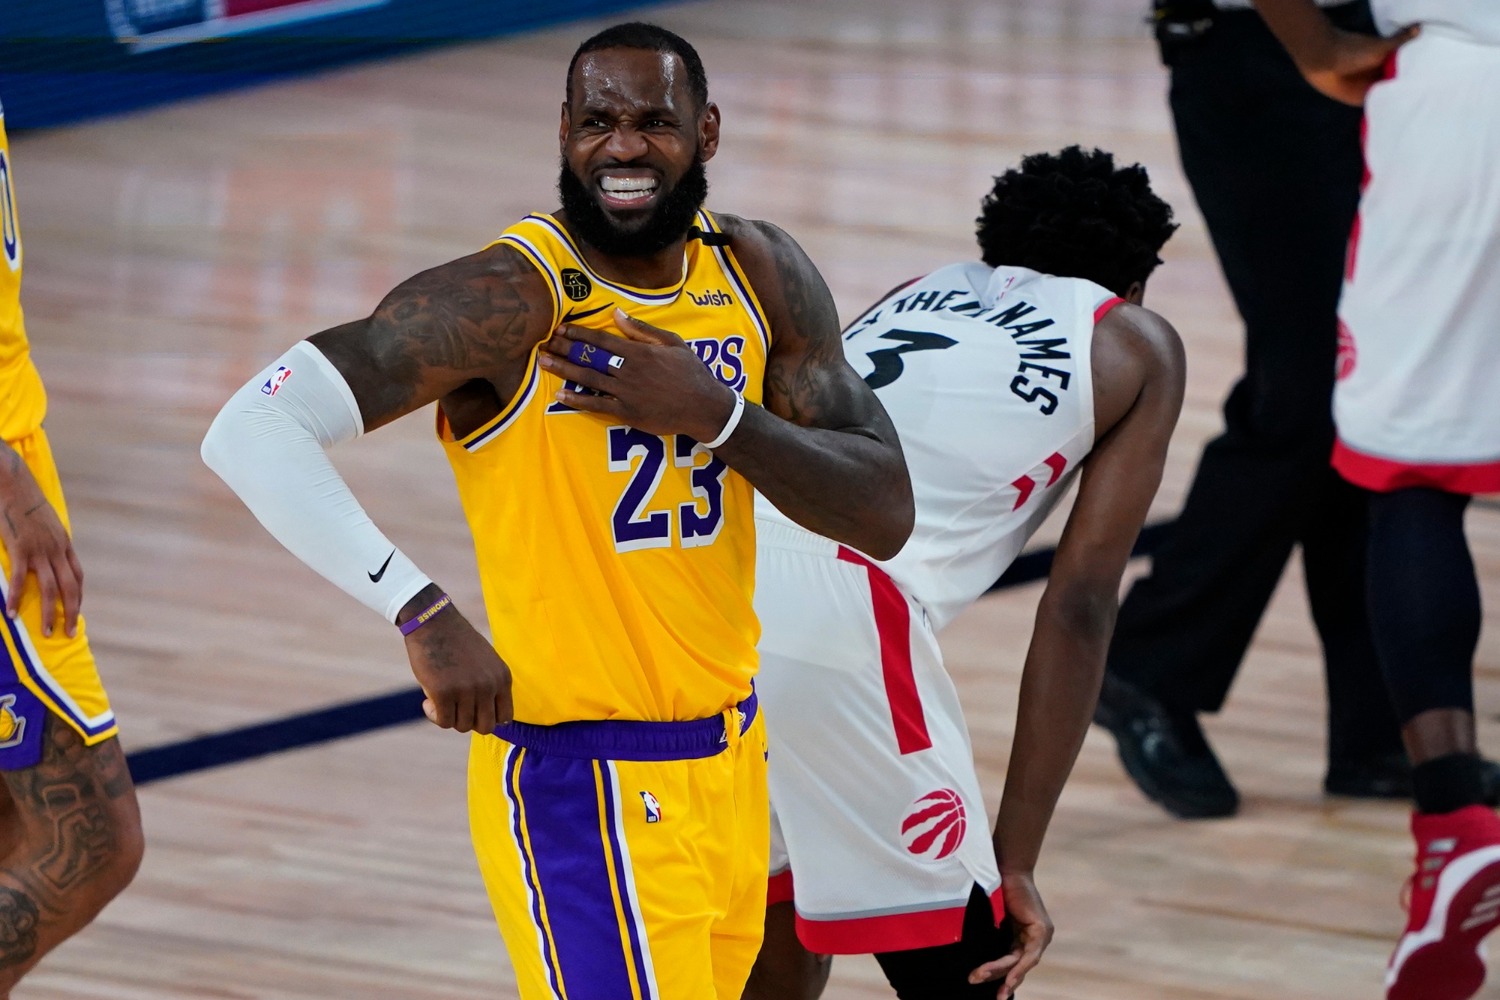 LeBron James will try to lead the Lakers to a title during a 2020 NBA playoffs that will be his "toughest championship run."